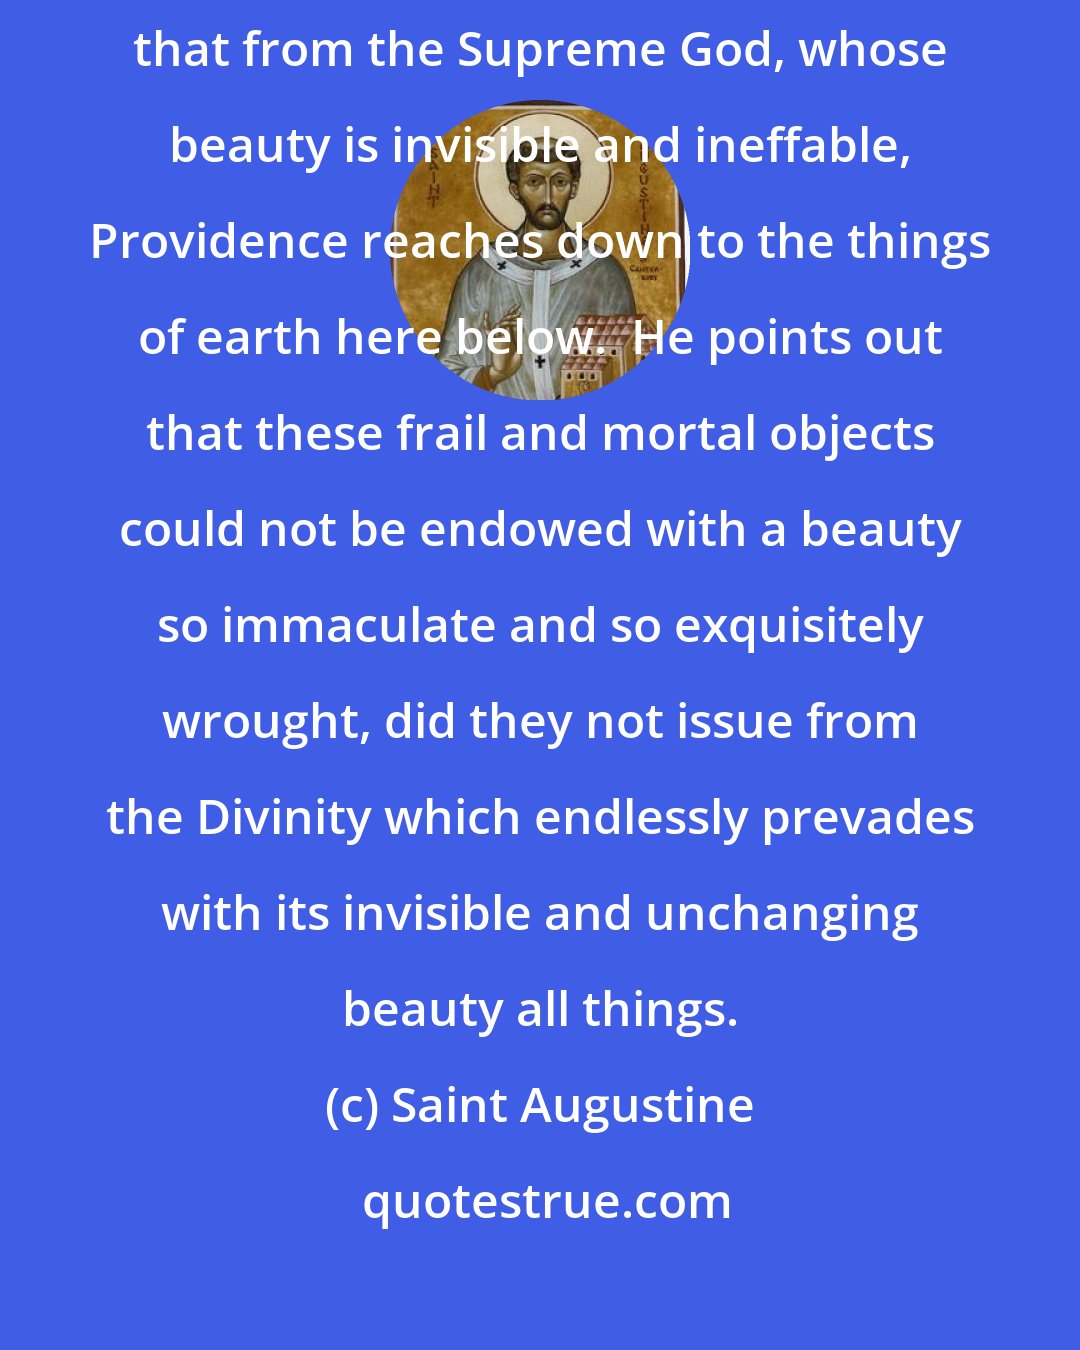 Saint Augustine: Poltinus the Platonist proves by means of the blossoms and leaves that from the Supreme God, whose beauty is invisible and ineffable, Providence reaches down to the things of earth here below.  He points out that these frail and mortal objects could not be endowed with a beauty so immaculate and so exquisitely wrought, did they not issue from the Divinity which endlessly prevades with its invisible and unchanging beauty all things.